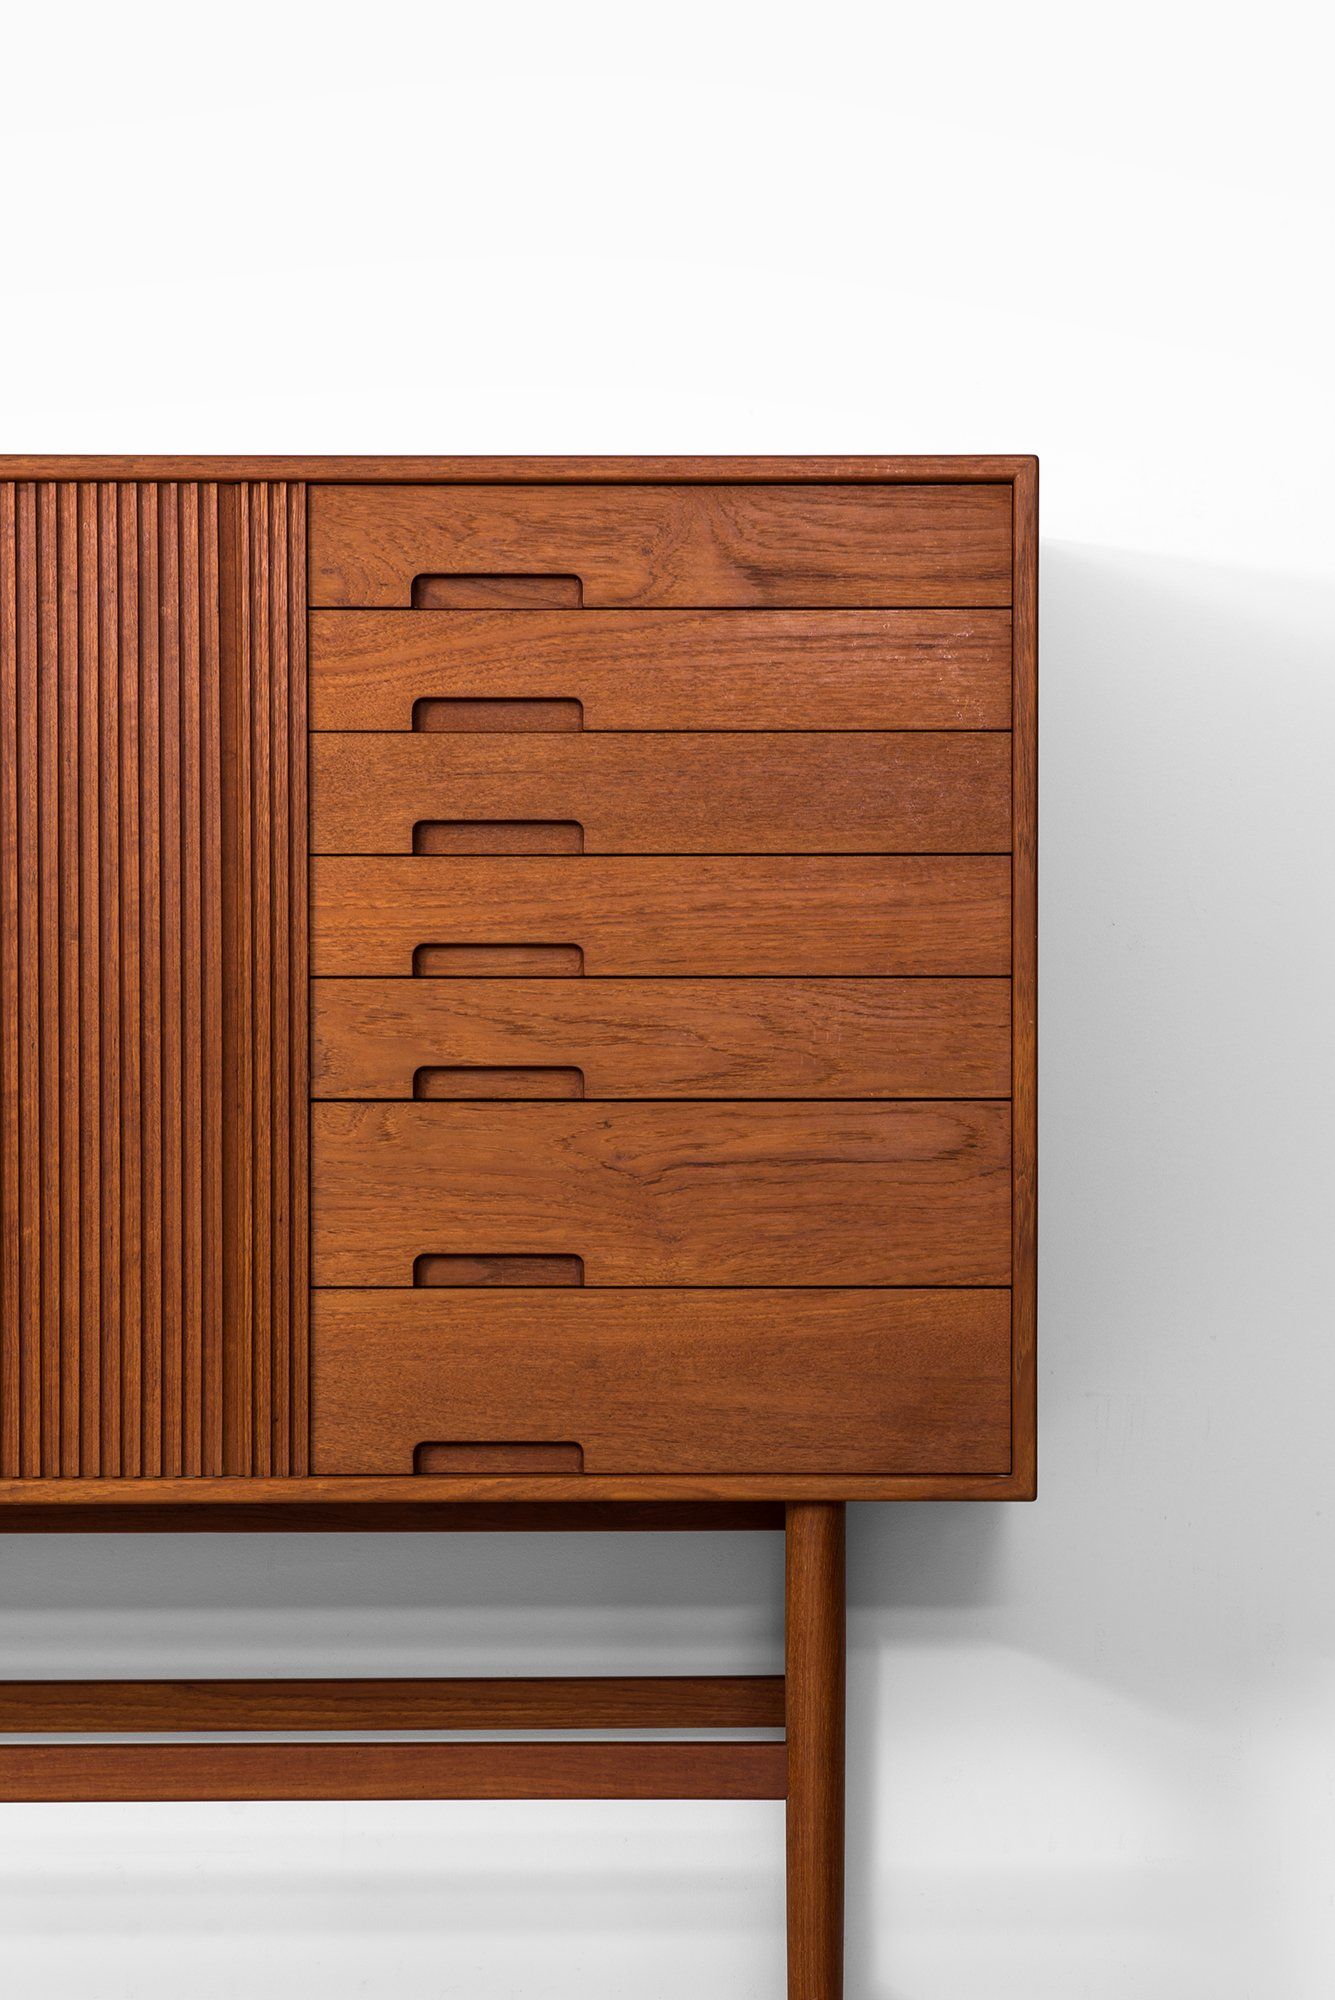 Exploring the Timeless Beauty of Danish
Furniture